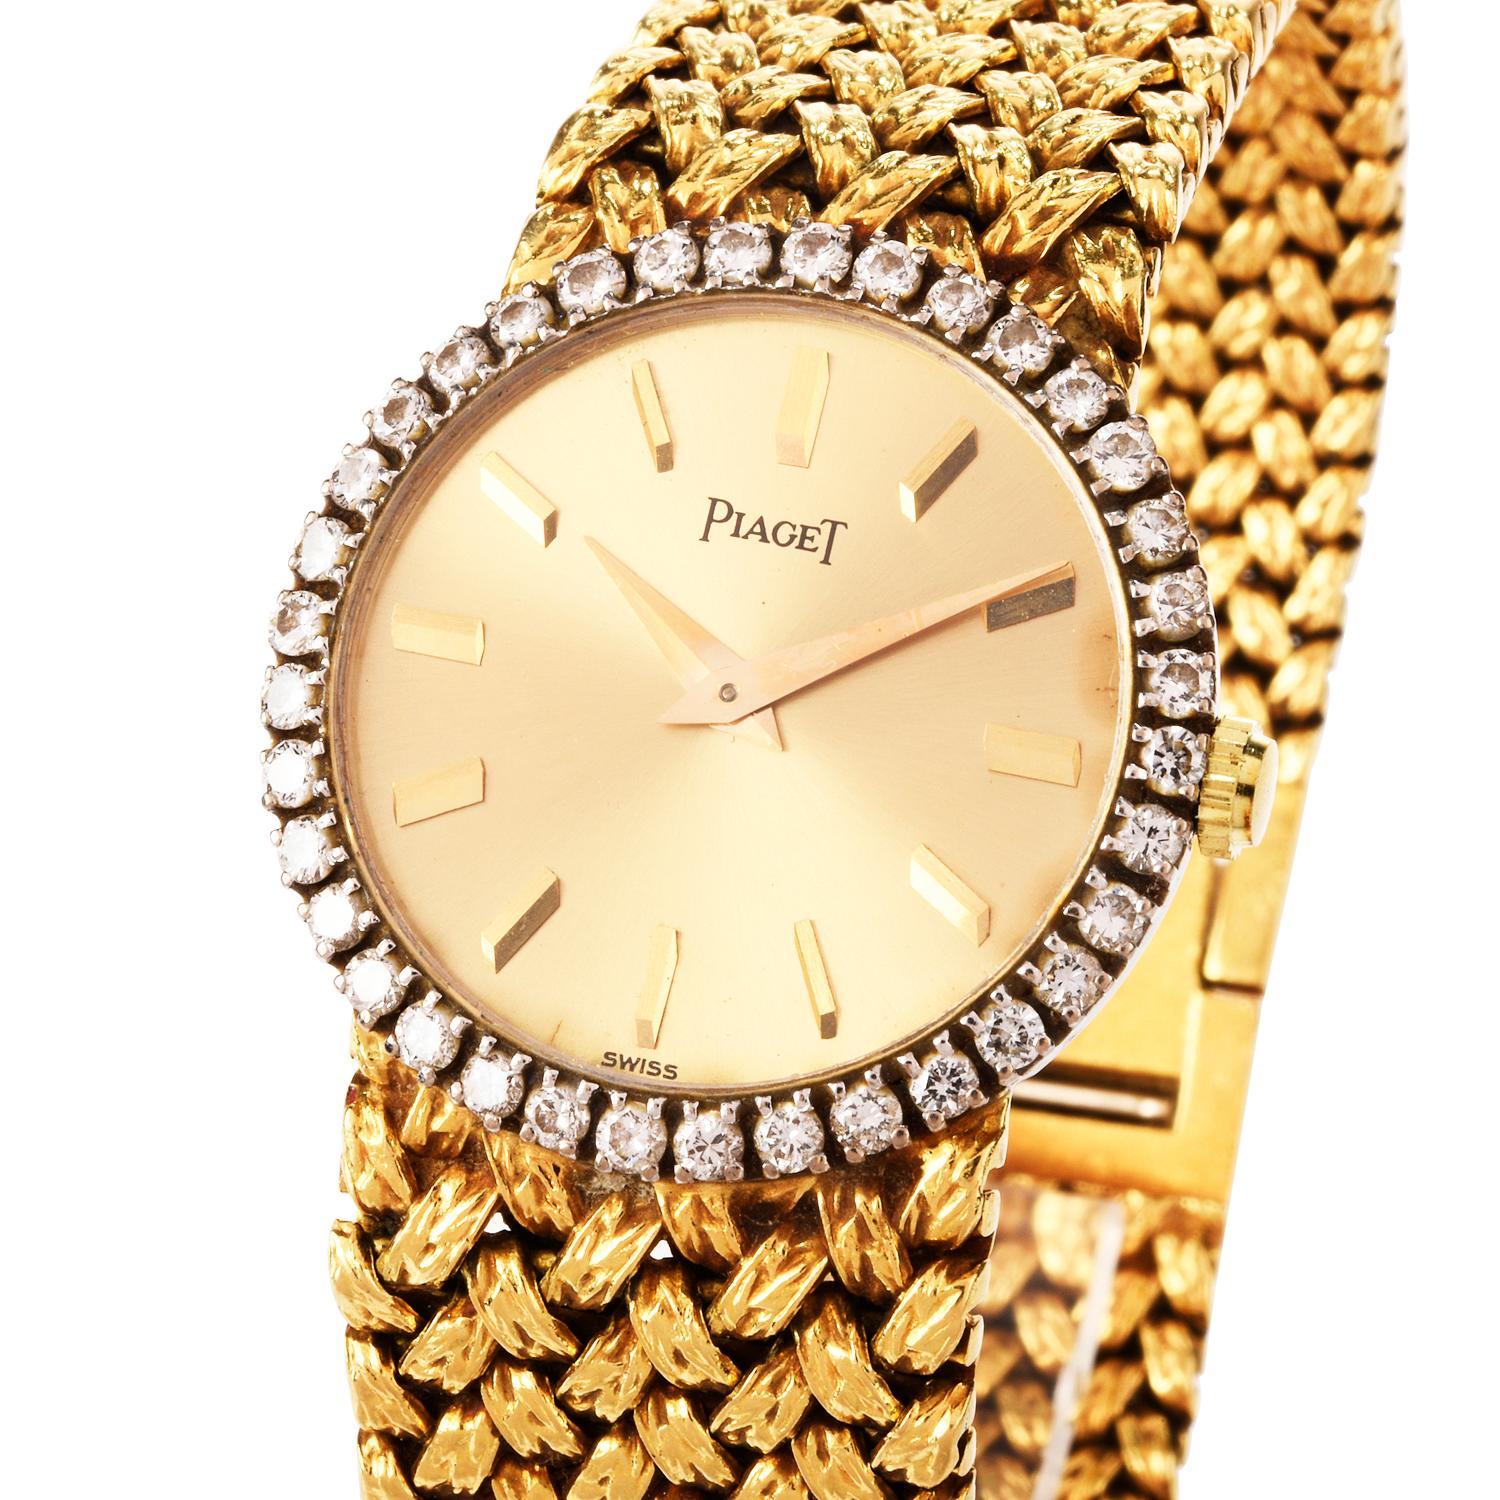 Very good  Conditioned Ladies late 1970's Traditional Piaget watch.

A factory set diamond bezel encompasses the gold dial and markers approx. 1.20 carats F-G color VS1 Clarity.

The casing and bracelet are 1 and are in the pattern of crisscross